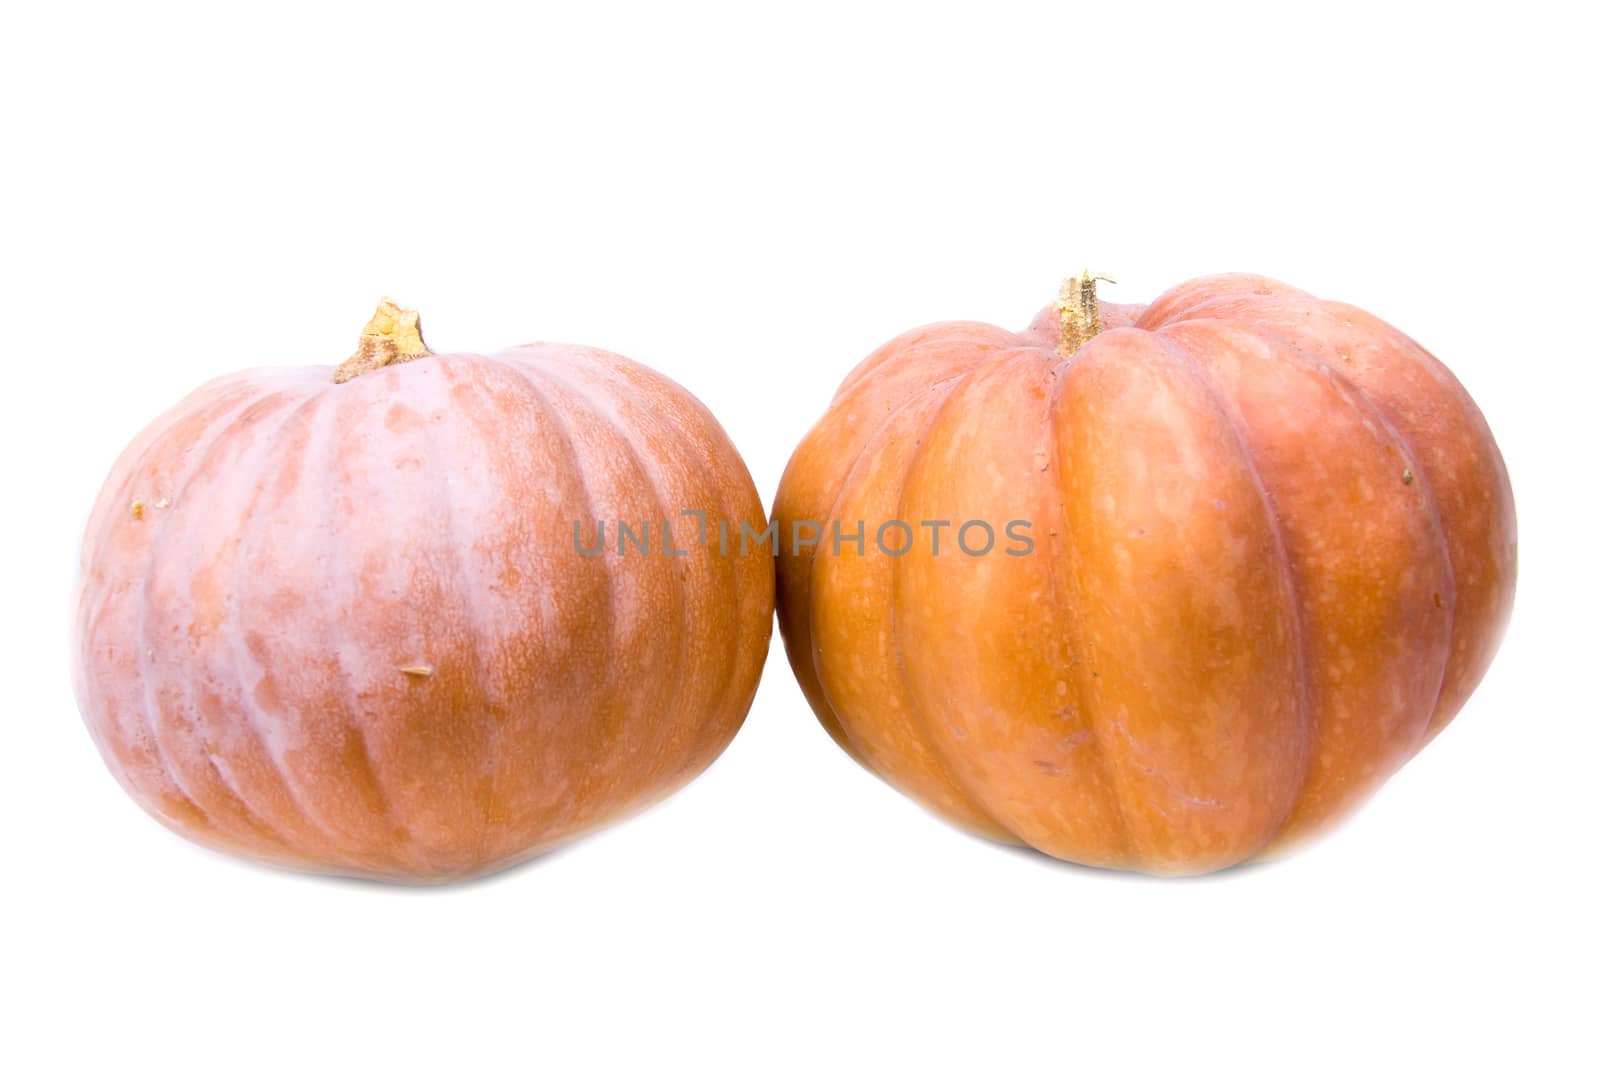 Ripe pumpkins on a white background seen from the front